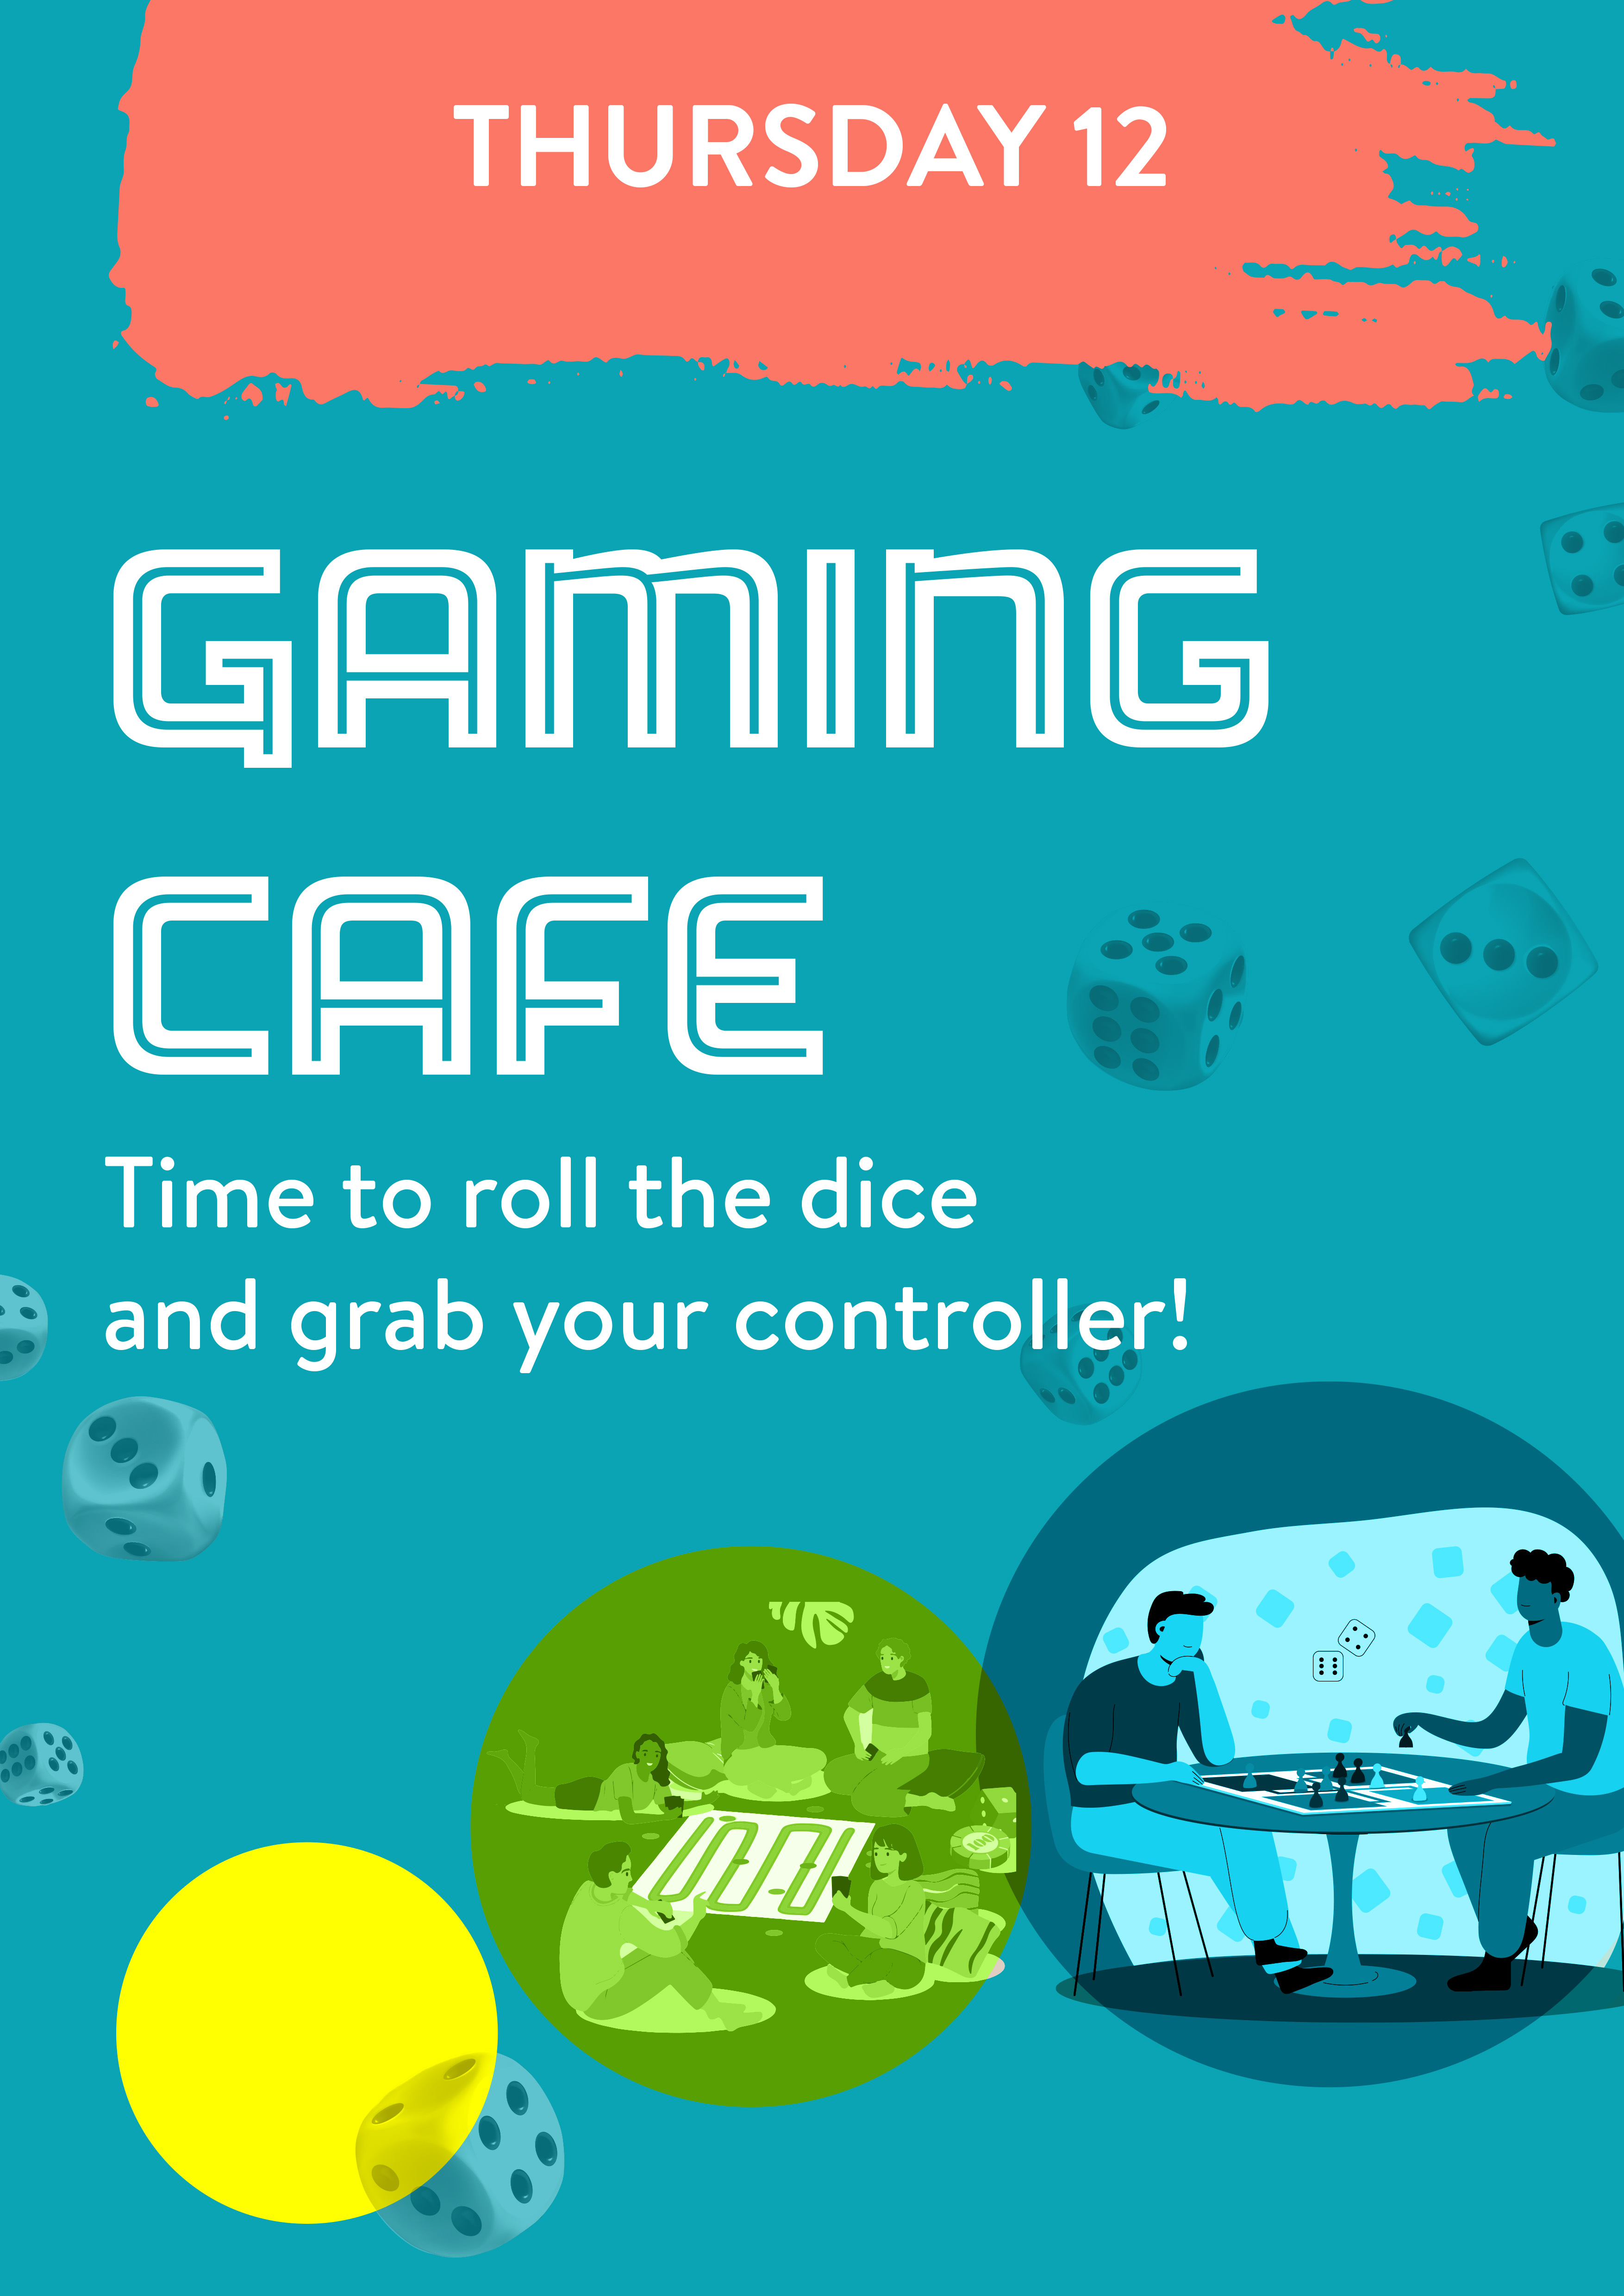 Thursday 12 January. Gaming Cafe. Time to roll the dice and grab your controller!